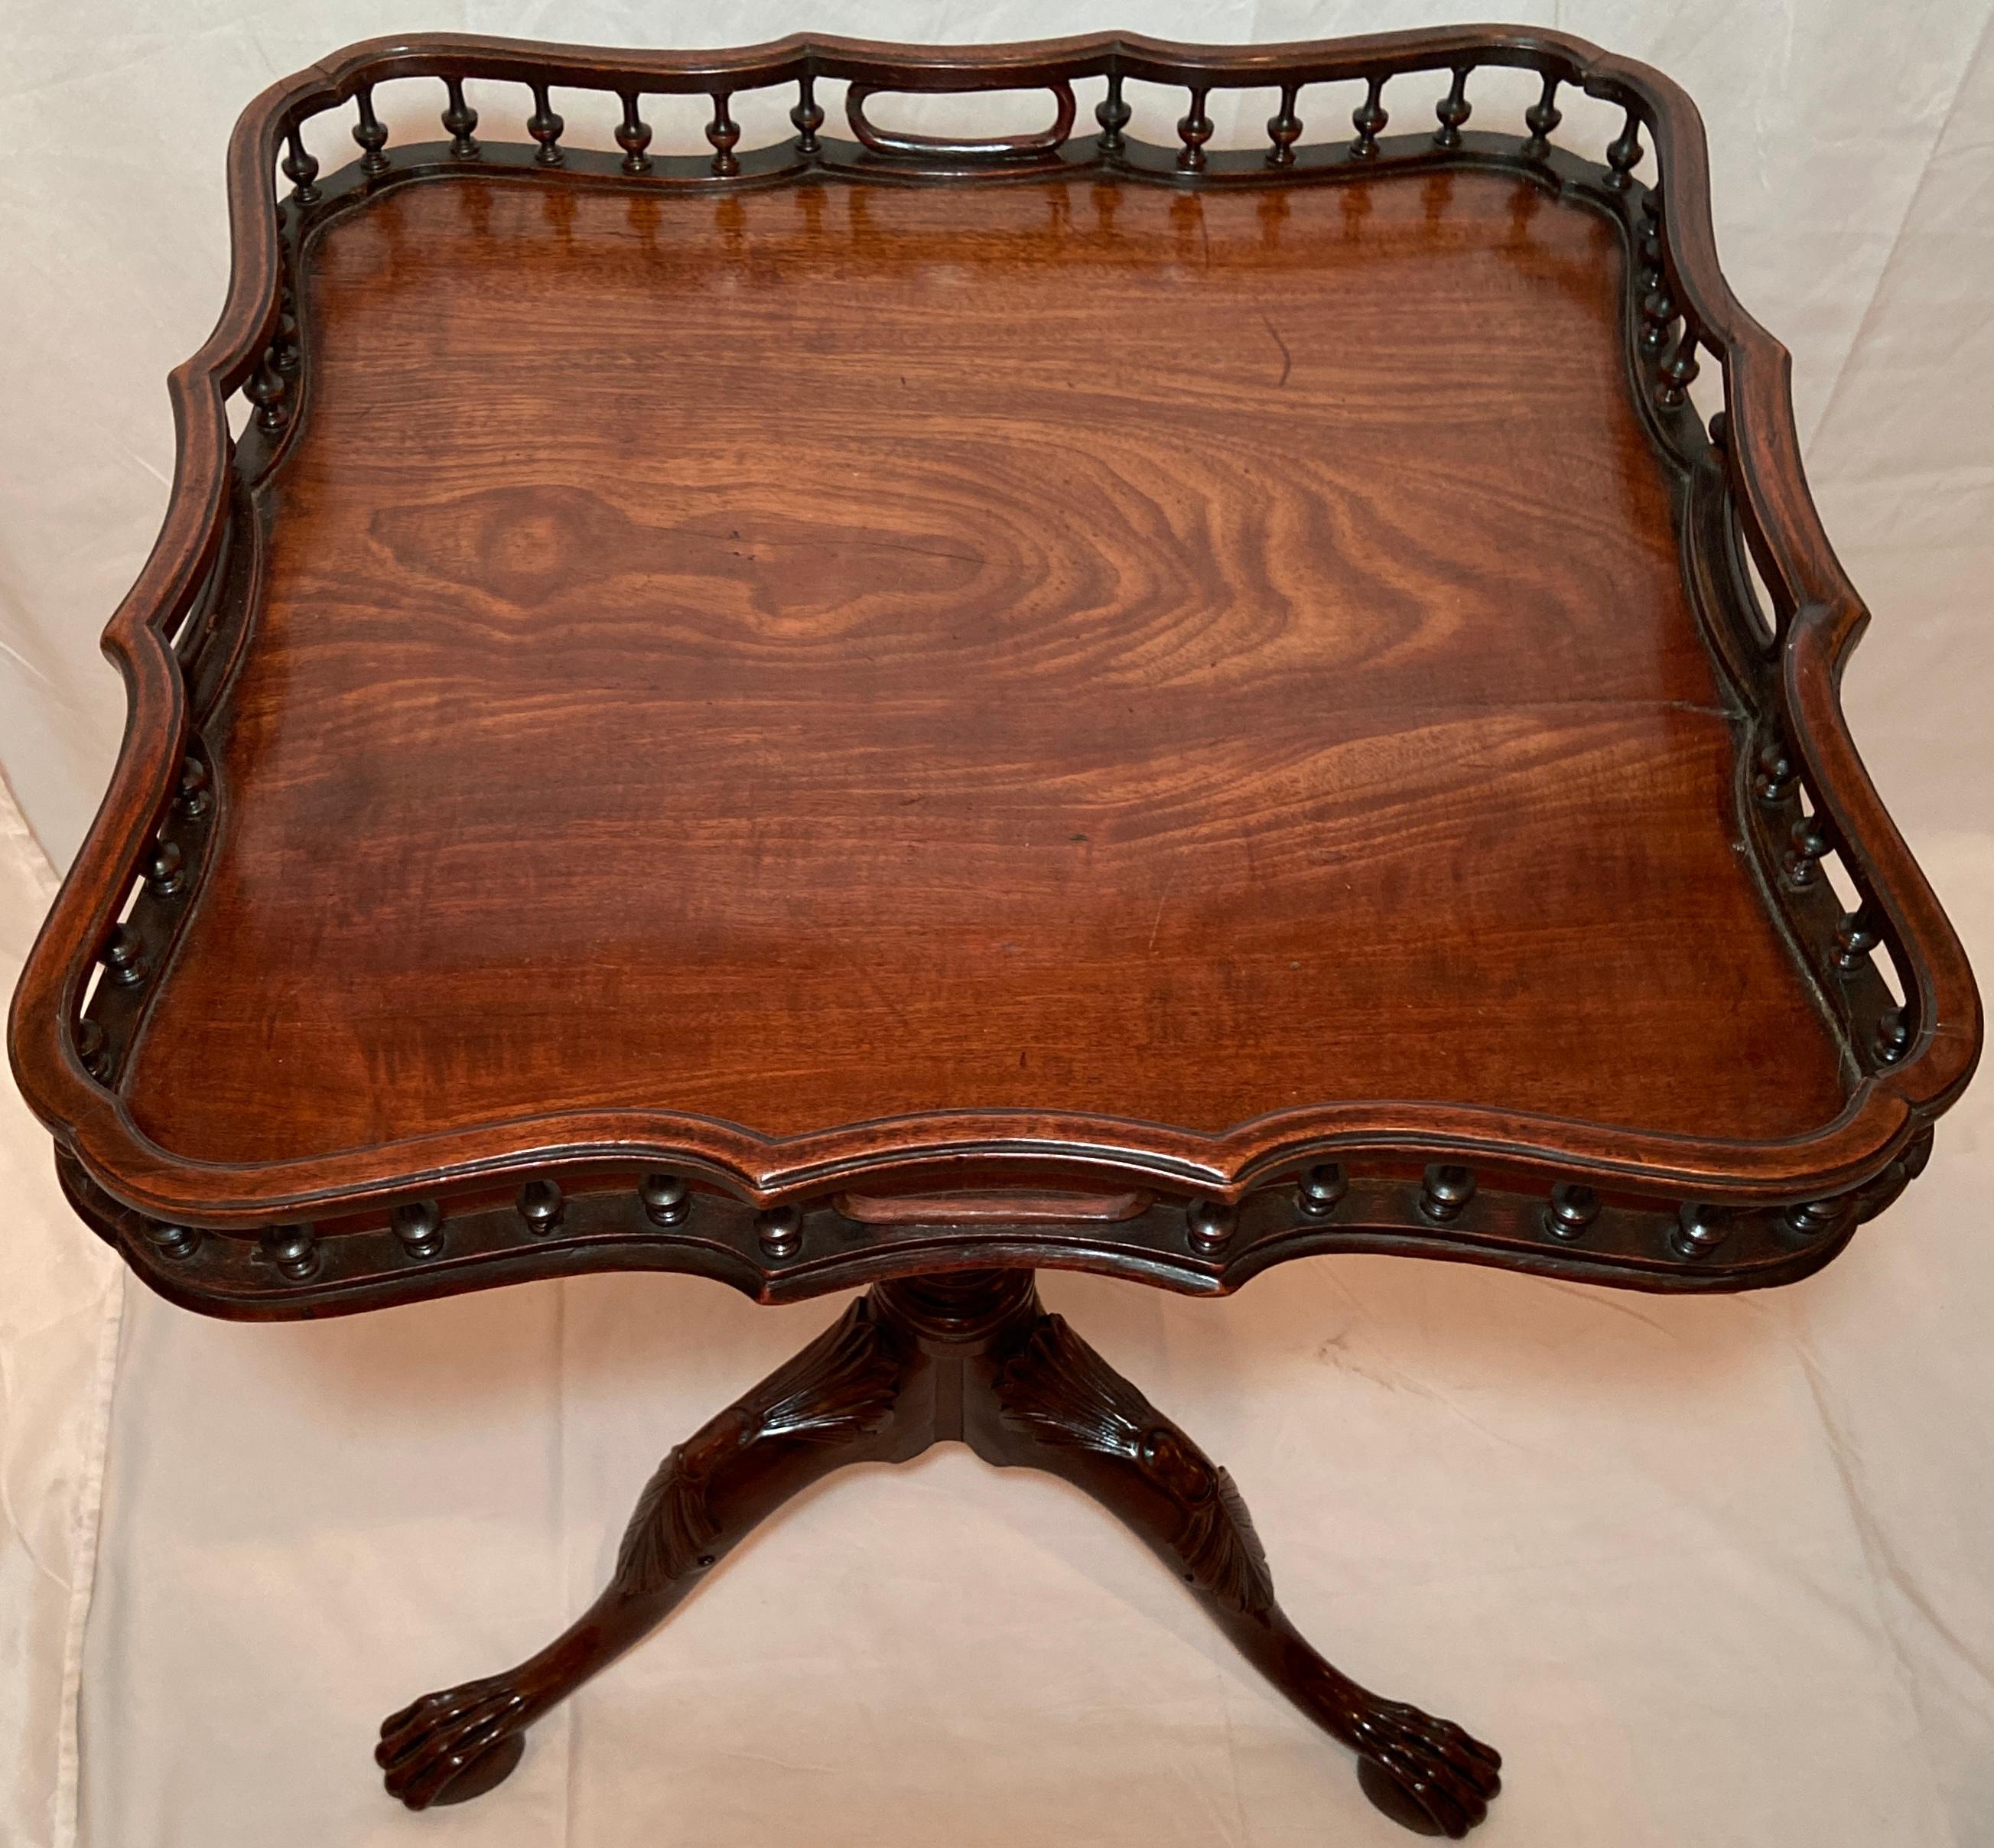 Antique English Georgian Mahogany Galleried Tilt-Top Pie Crust Table, Circa 1840 In Good Condition For Sale In New Orleans, LA